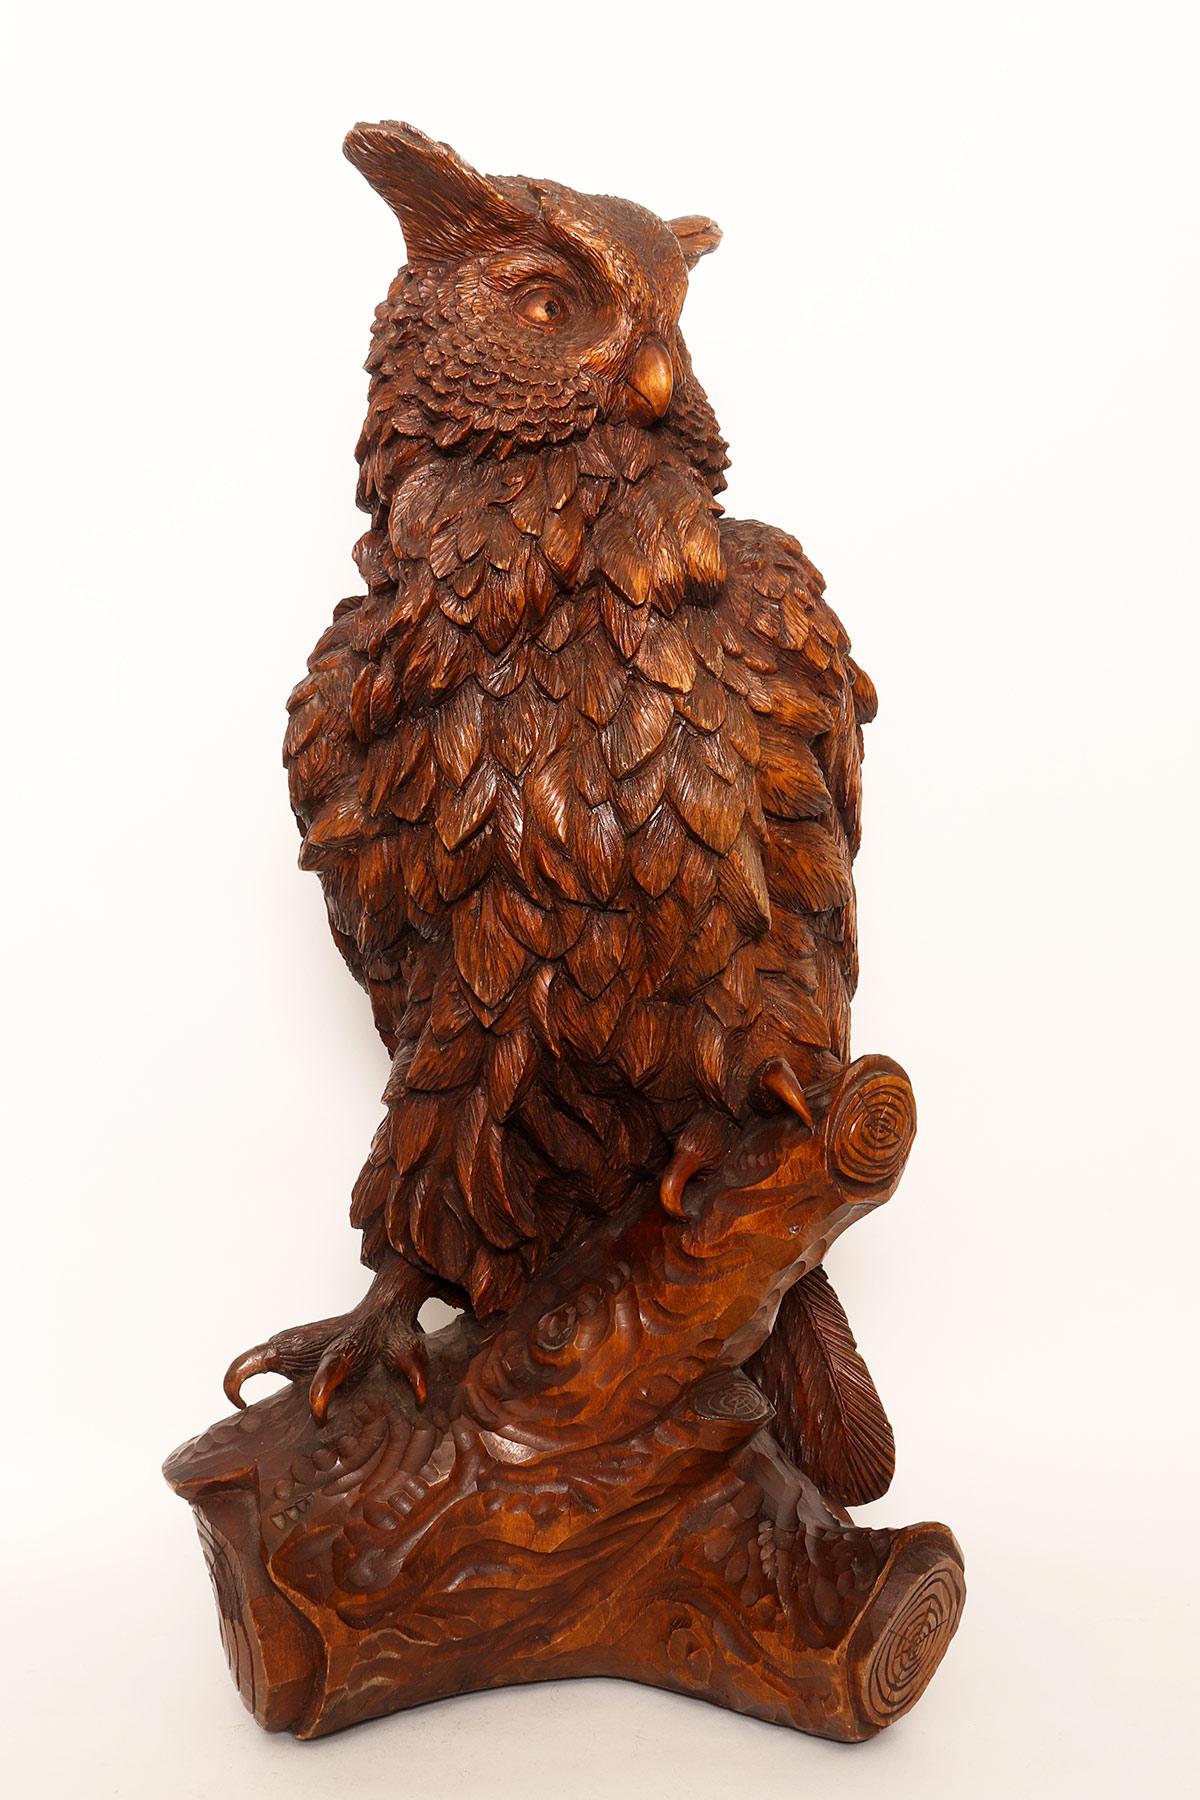 Large carved hazelnut wood sculpture depicting an owl leaning against a tree branch. Brienz, Switzerland, second half of the 19th century.